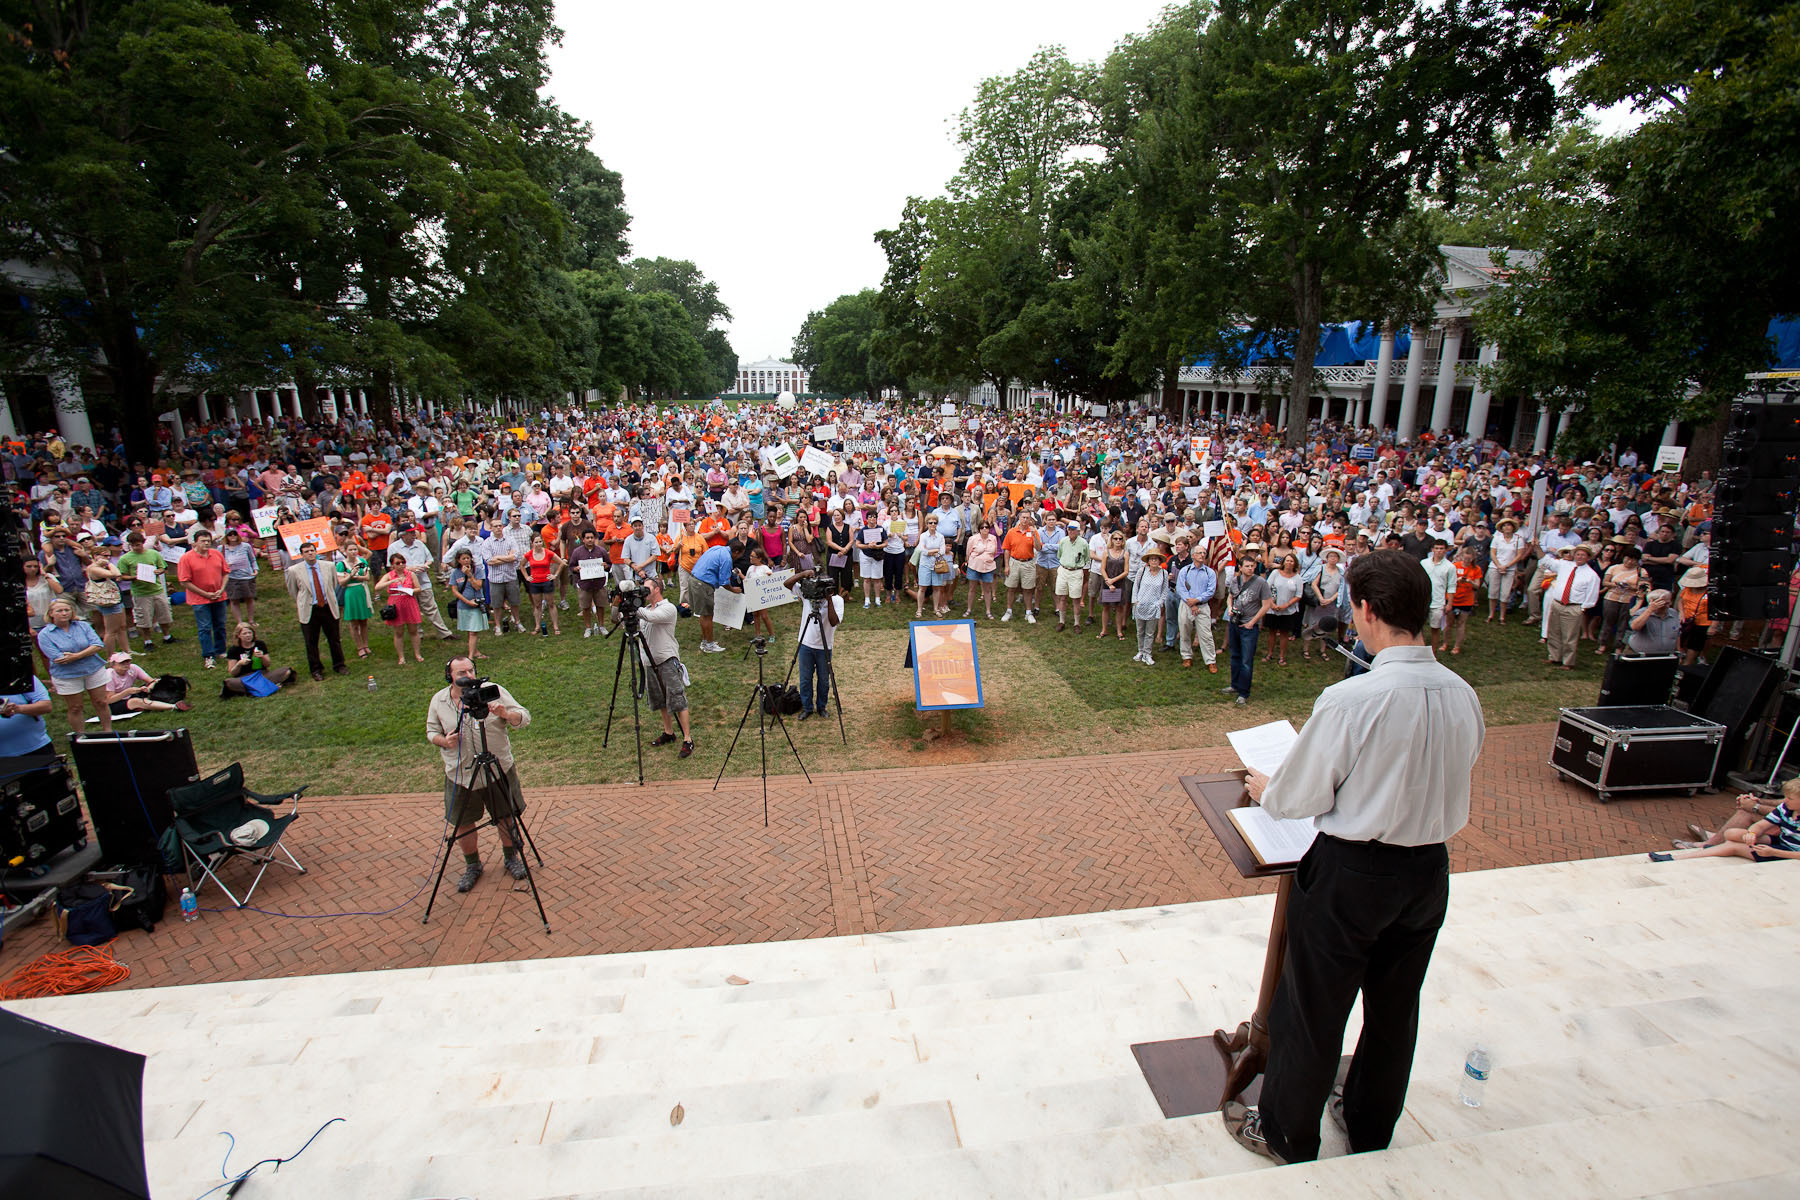 Man stands at a podium giving a speech to a Lawn full of people